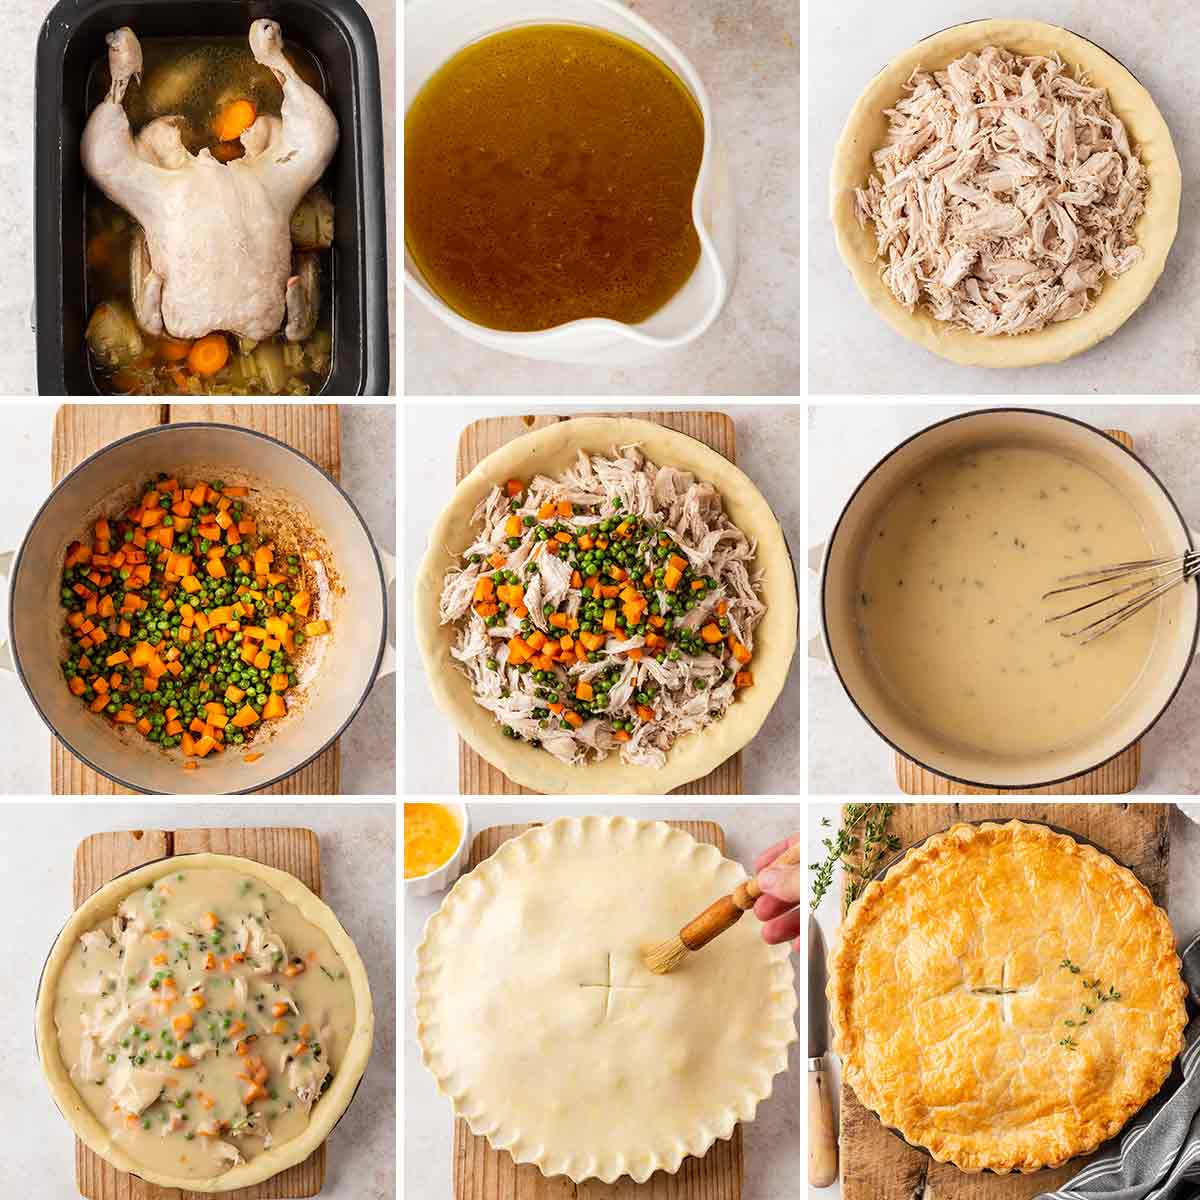 How to Make Puff Pastry Chicken Pot Pie